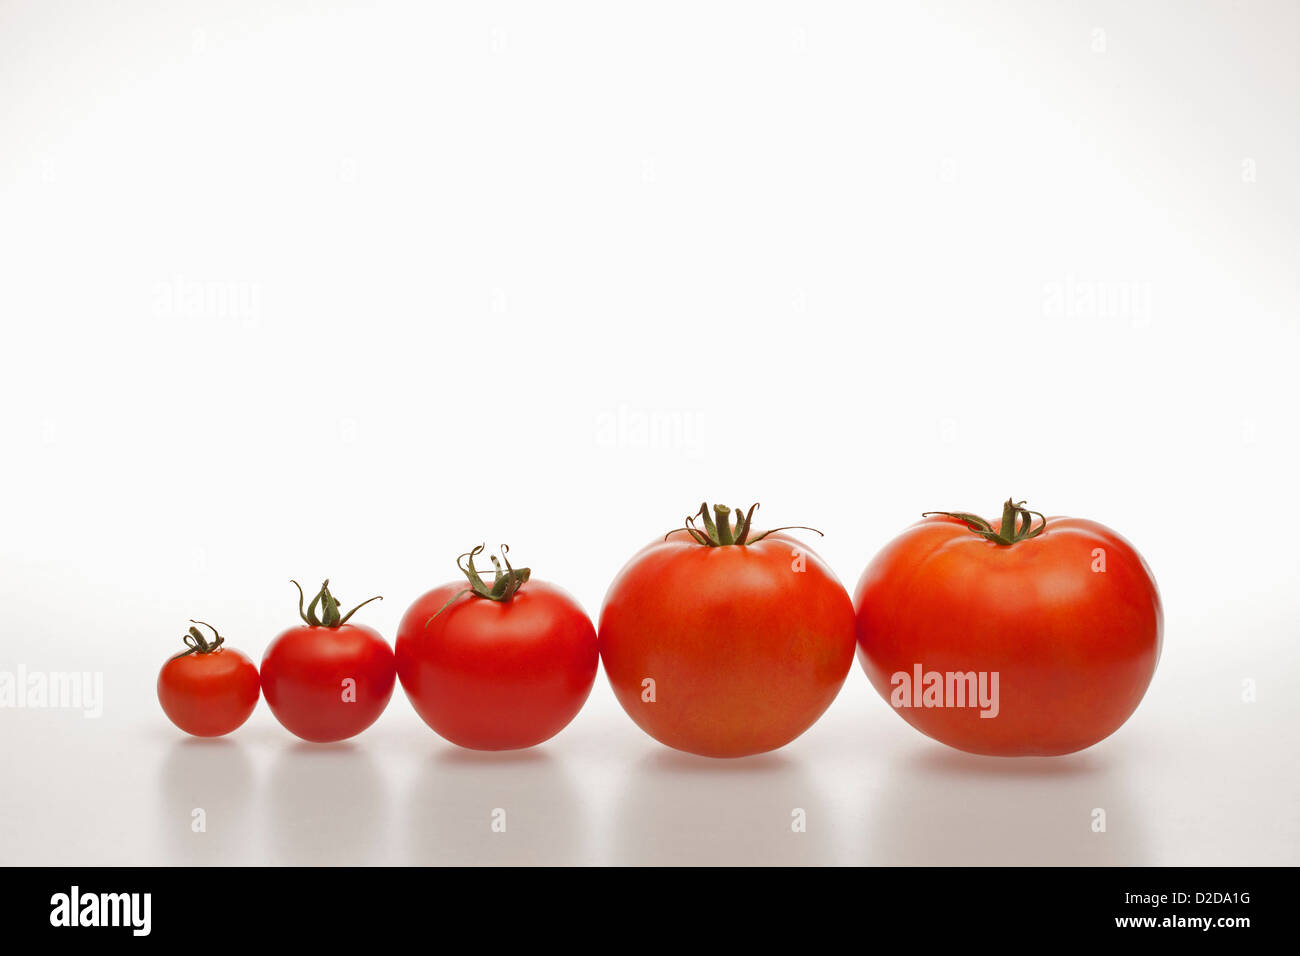 A row of tomatoes increasing in size from smallest to largest Stock Photo